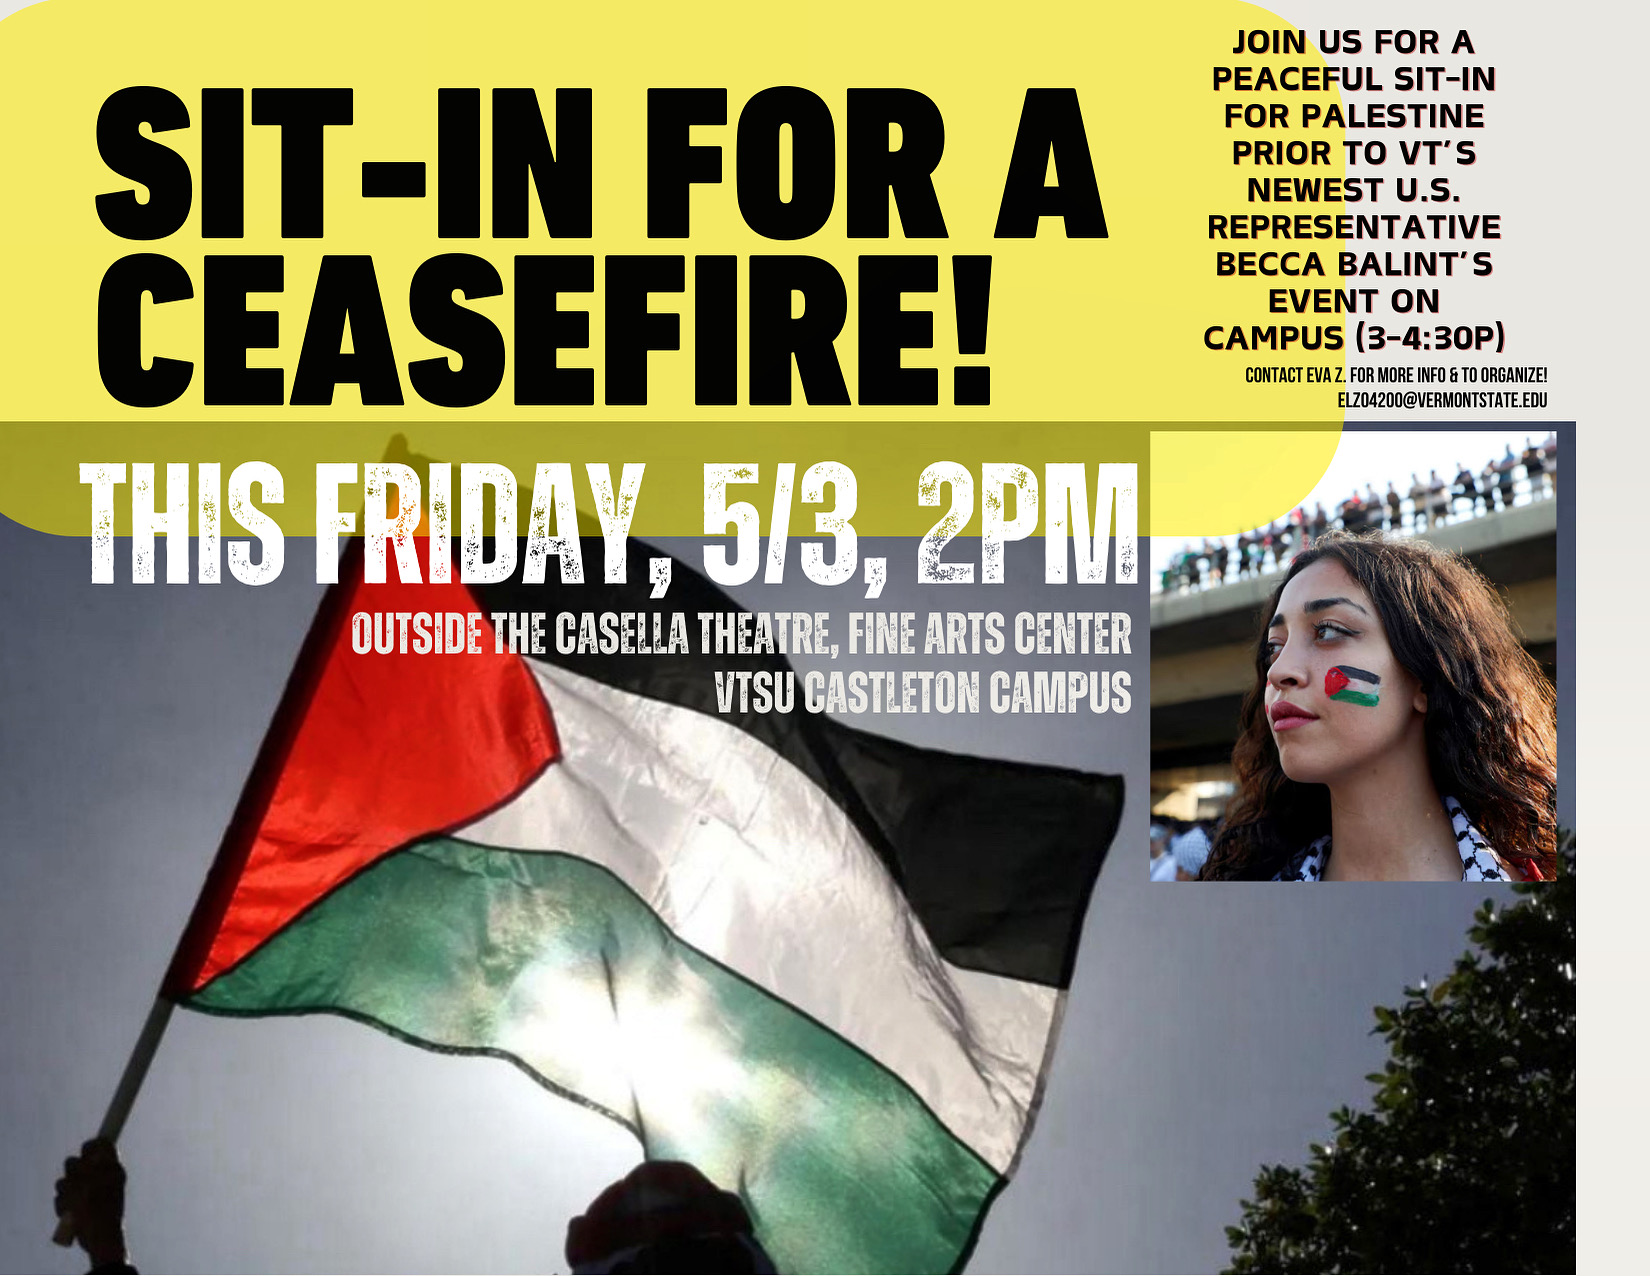 Join in the Peaceful Sit-in for Palestine prior to Vermont's newest US Representative Becca Balint's Event on Campus from 3-4:30 pm!

Friday, May 3rd

2 pm | Outside Casella Theatre

Please email Eva Zimmerman for more information or to help organize!